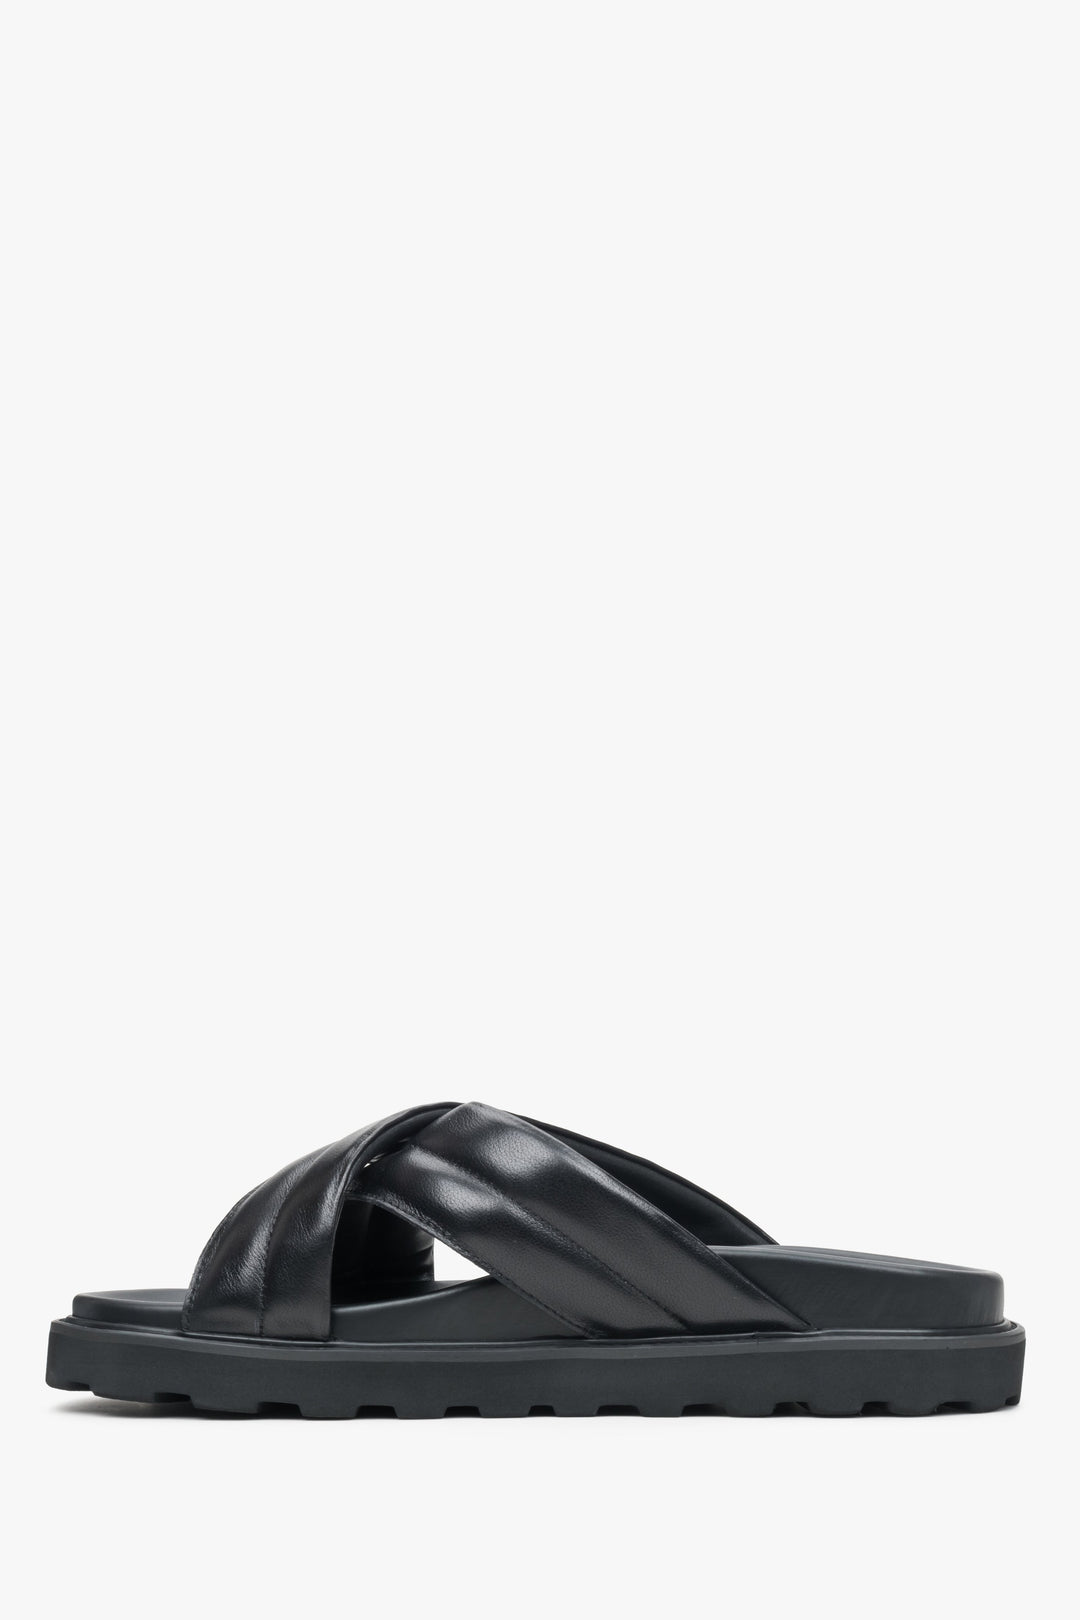 Estro men's  black leather sandals with a soft sole and crossed straps - shoe profile.